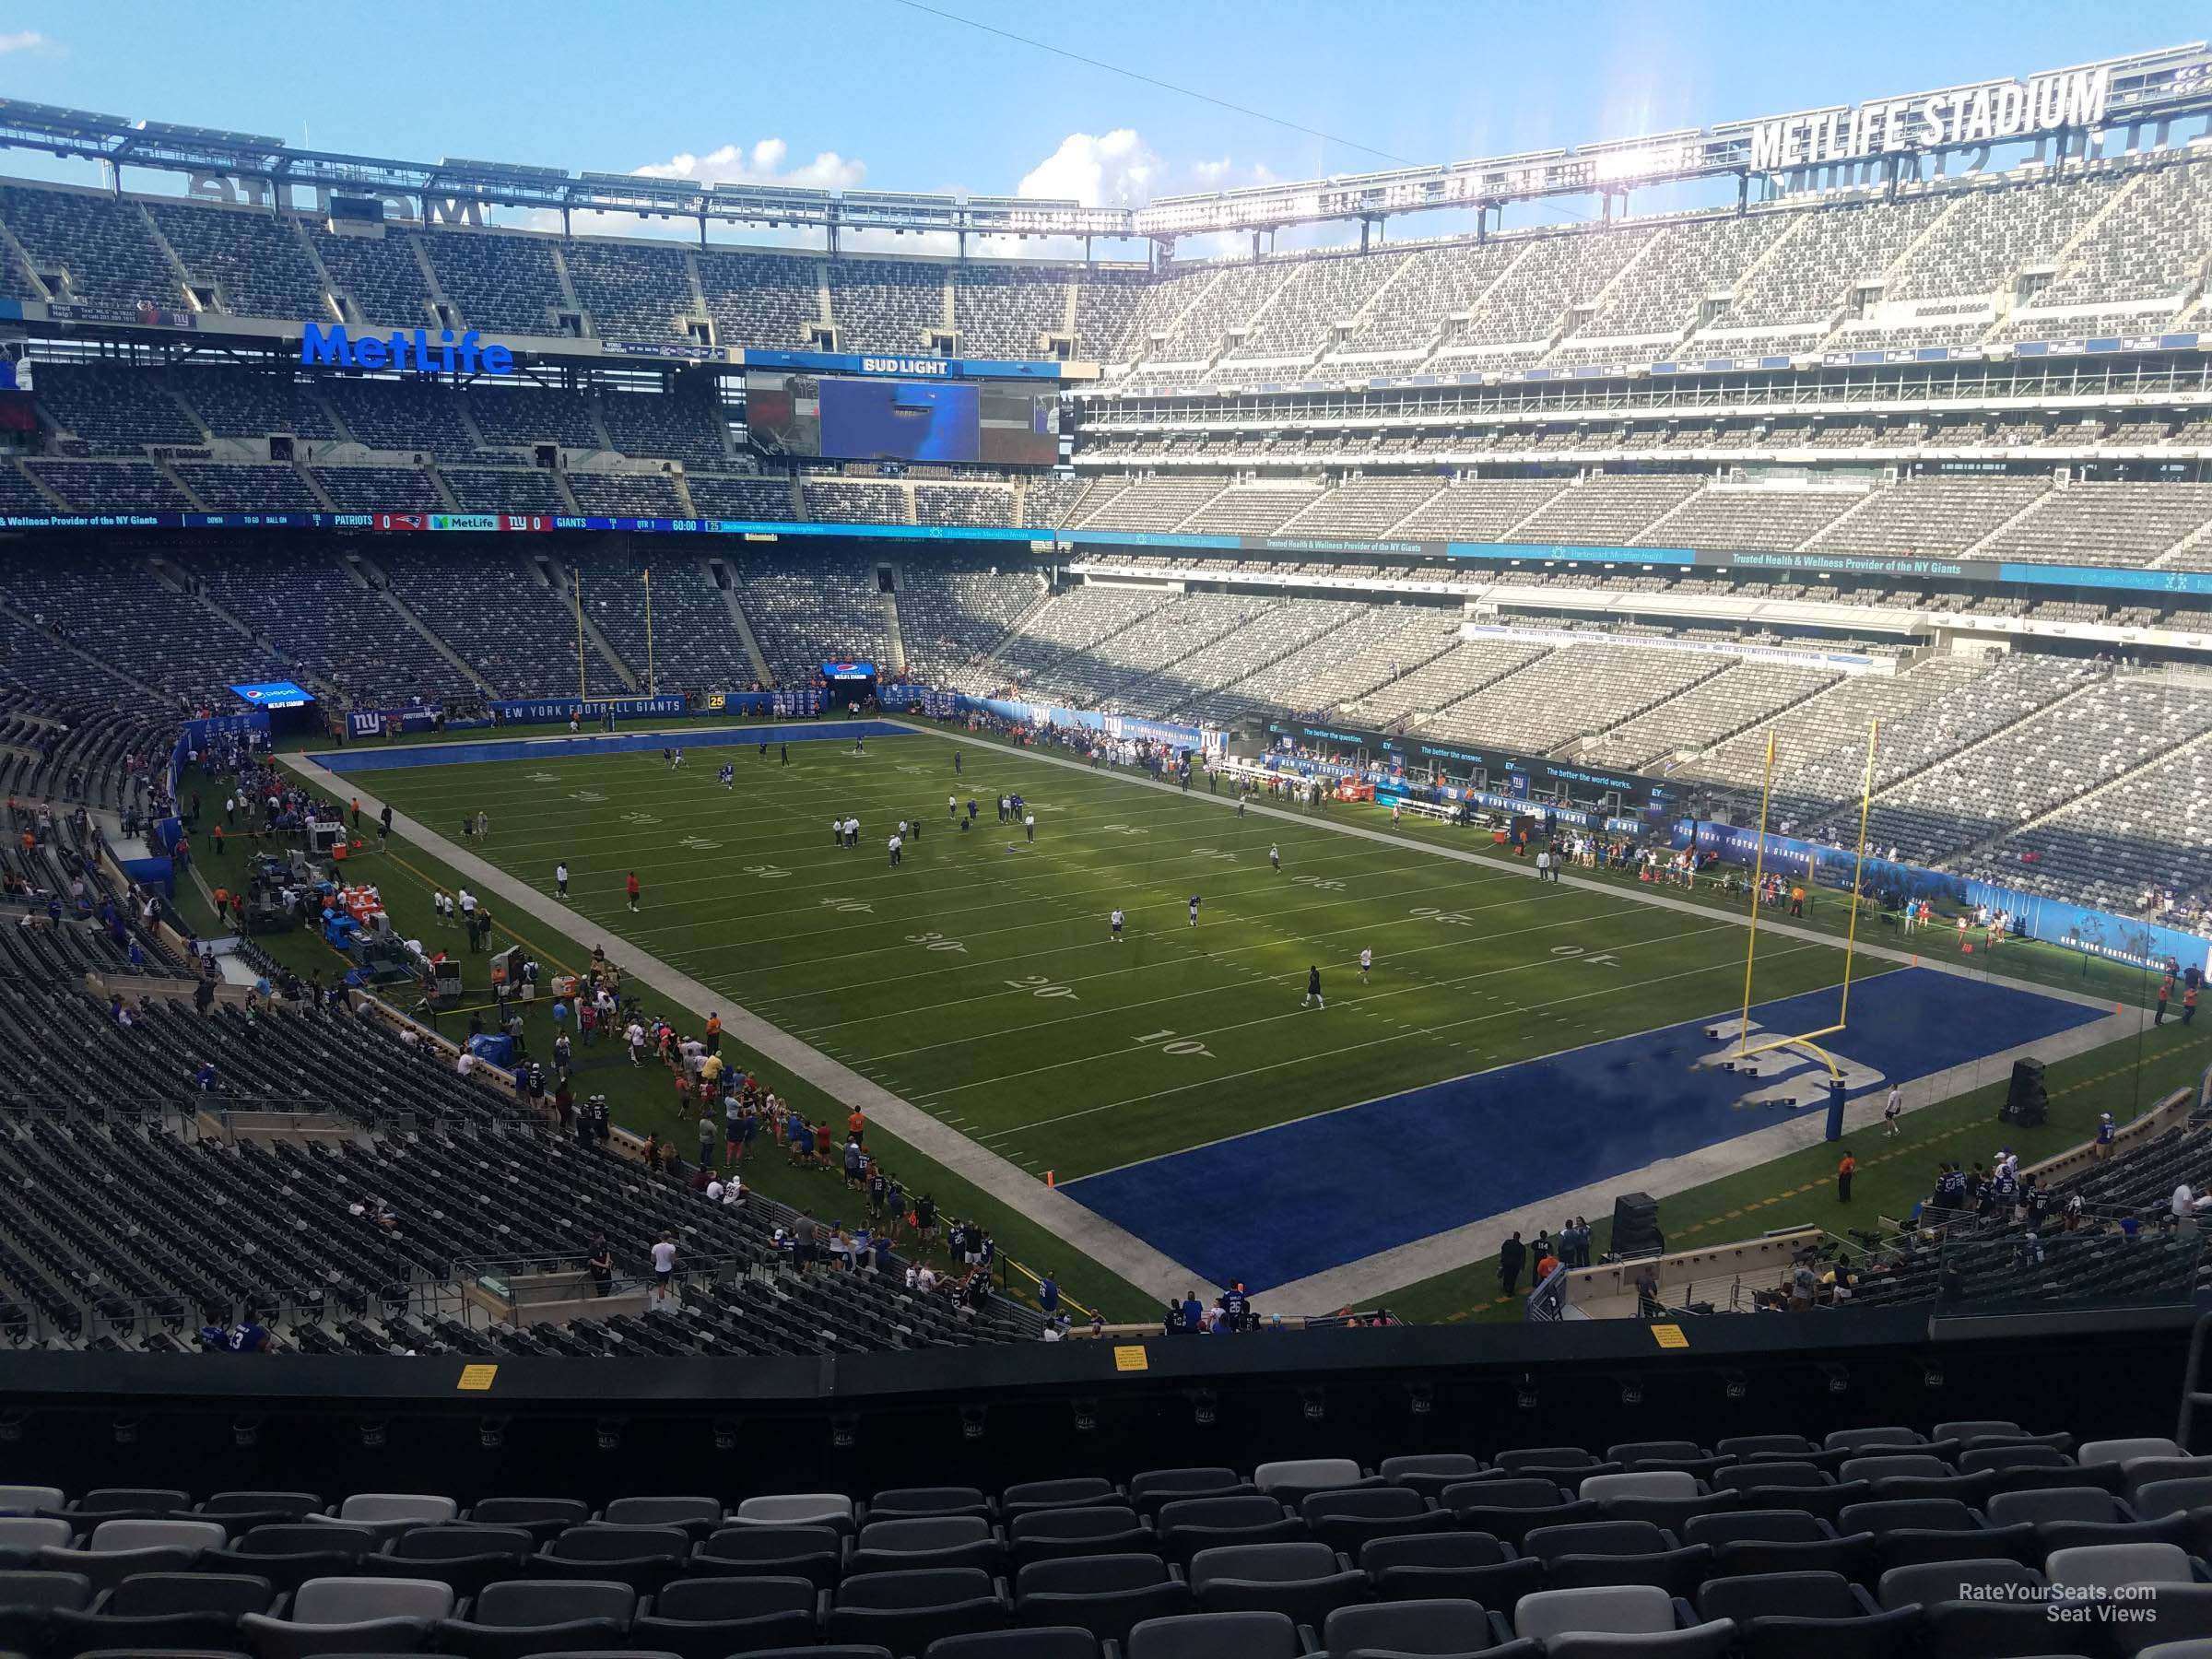 section 231, row 9 seat view  for football - metlife stadium